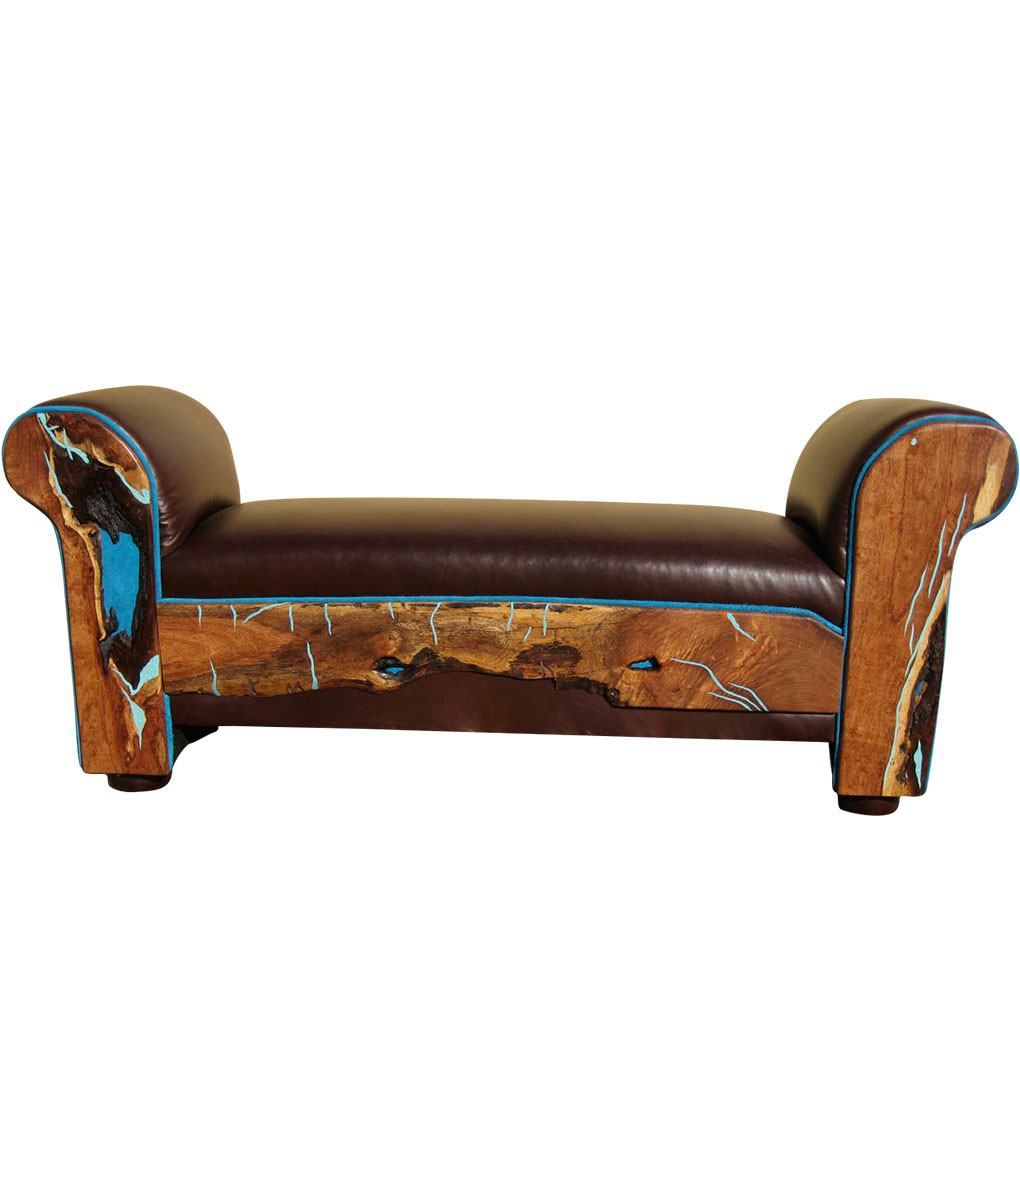 Rustic Bedroom Bench
 Southwest Western Style Leather Bench with Turquoise